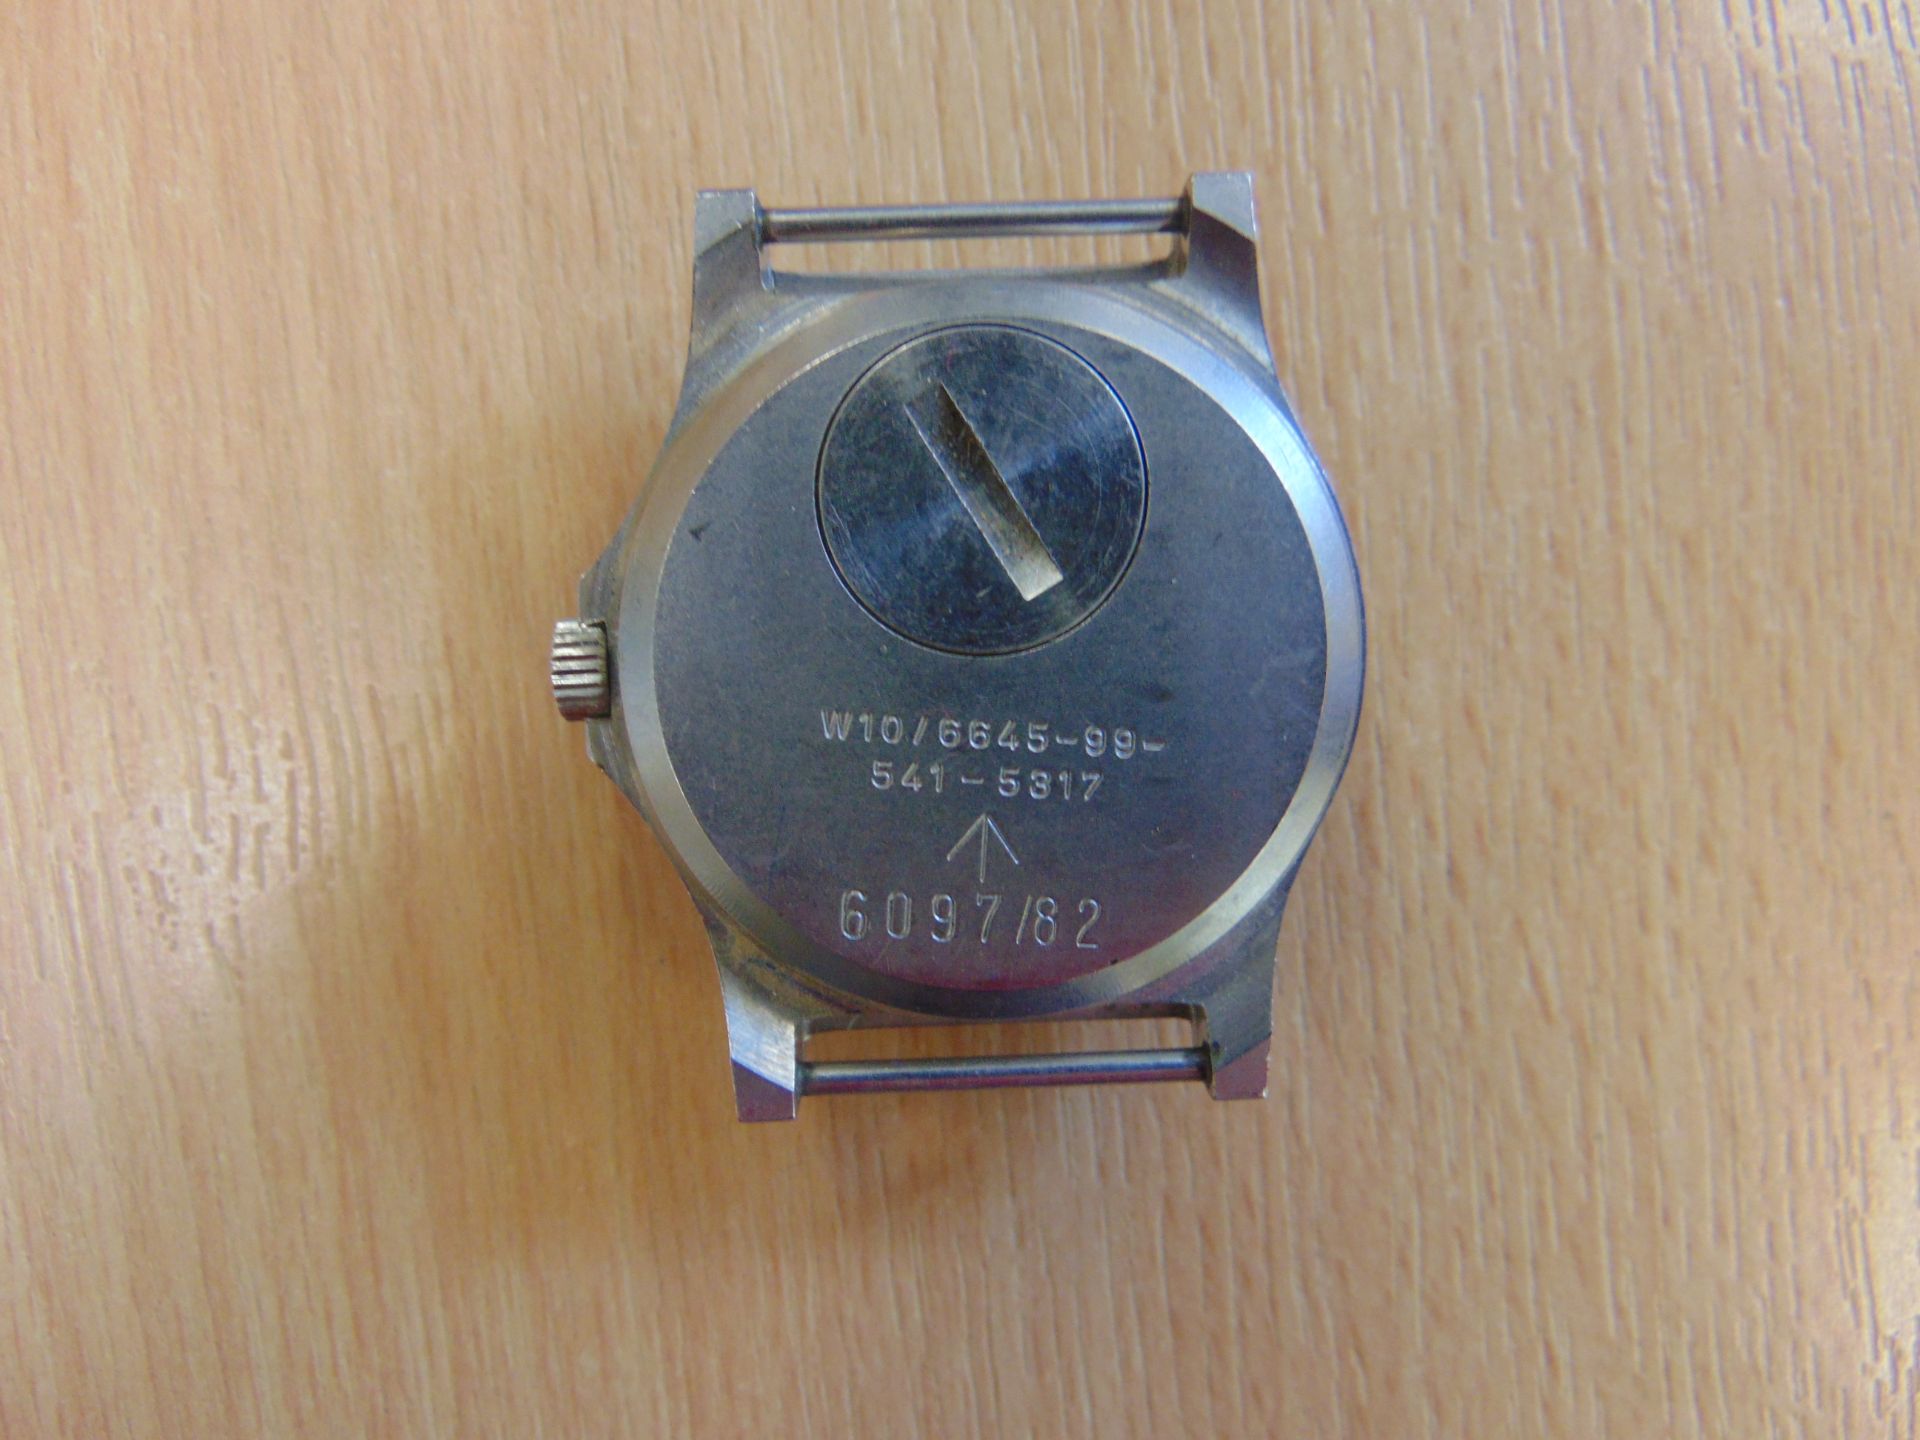 VERY RARE CWC W10 FAT BOY SERVICE WATCH DATED 1982 (FALKLANDS) - Image 10 of 14